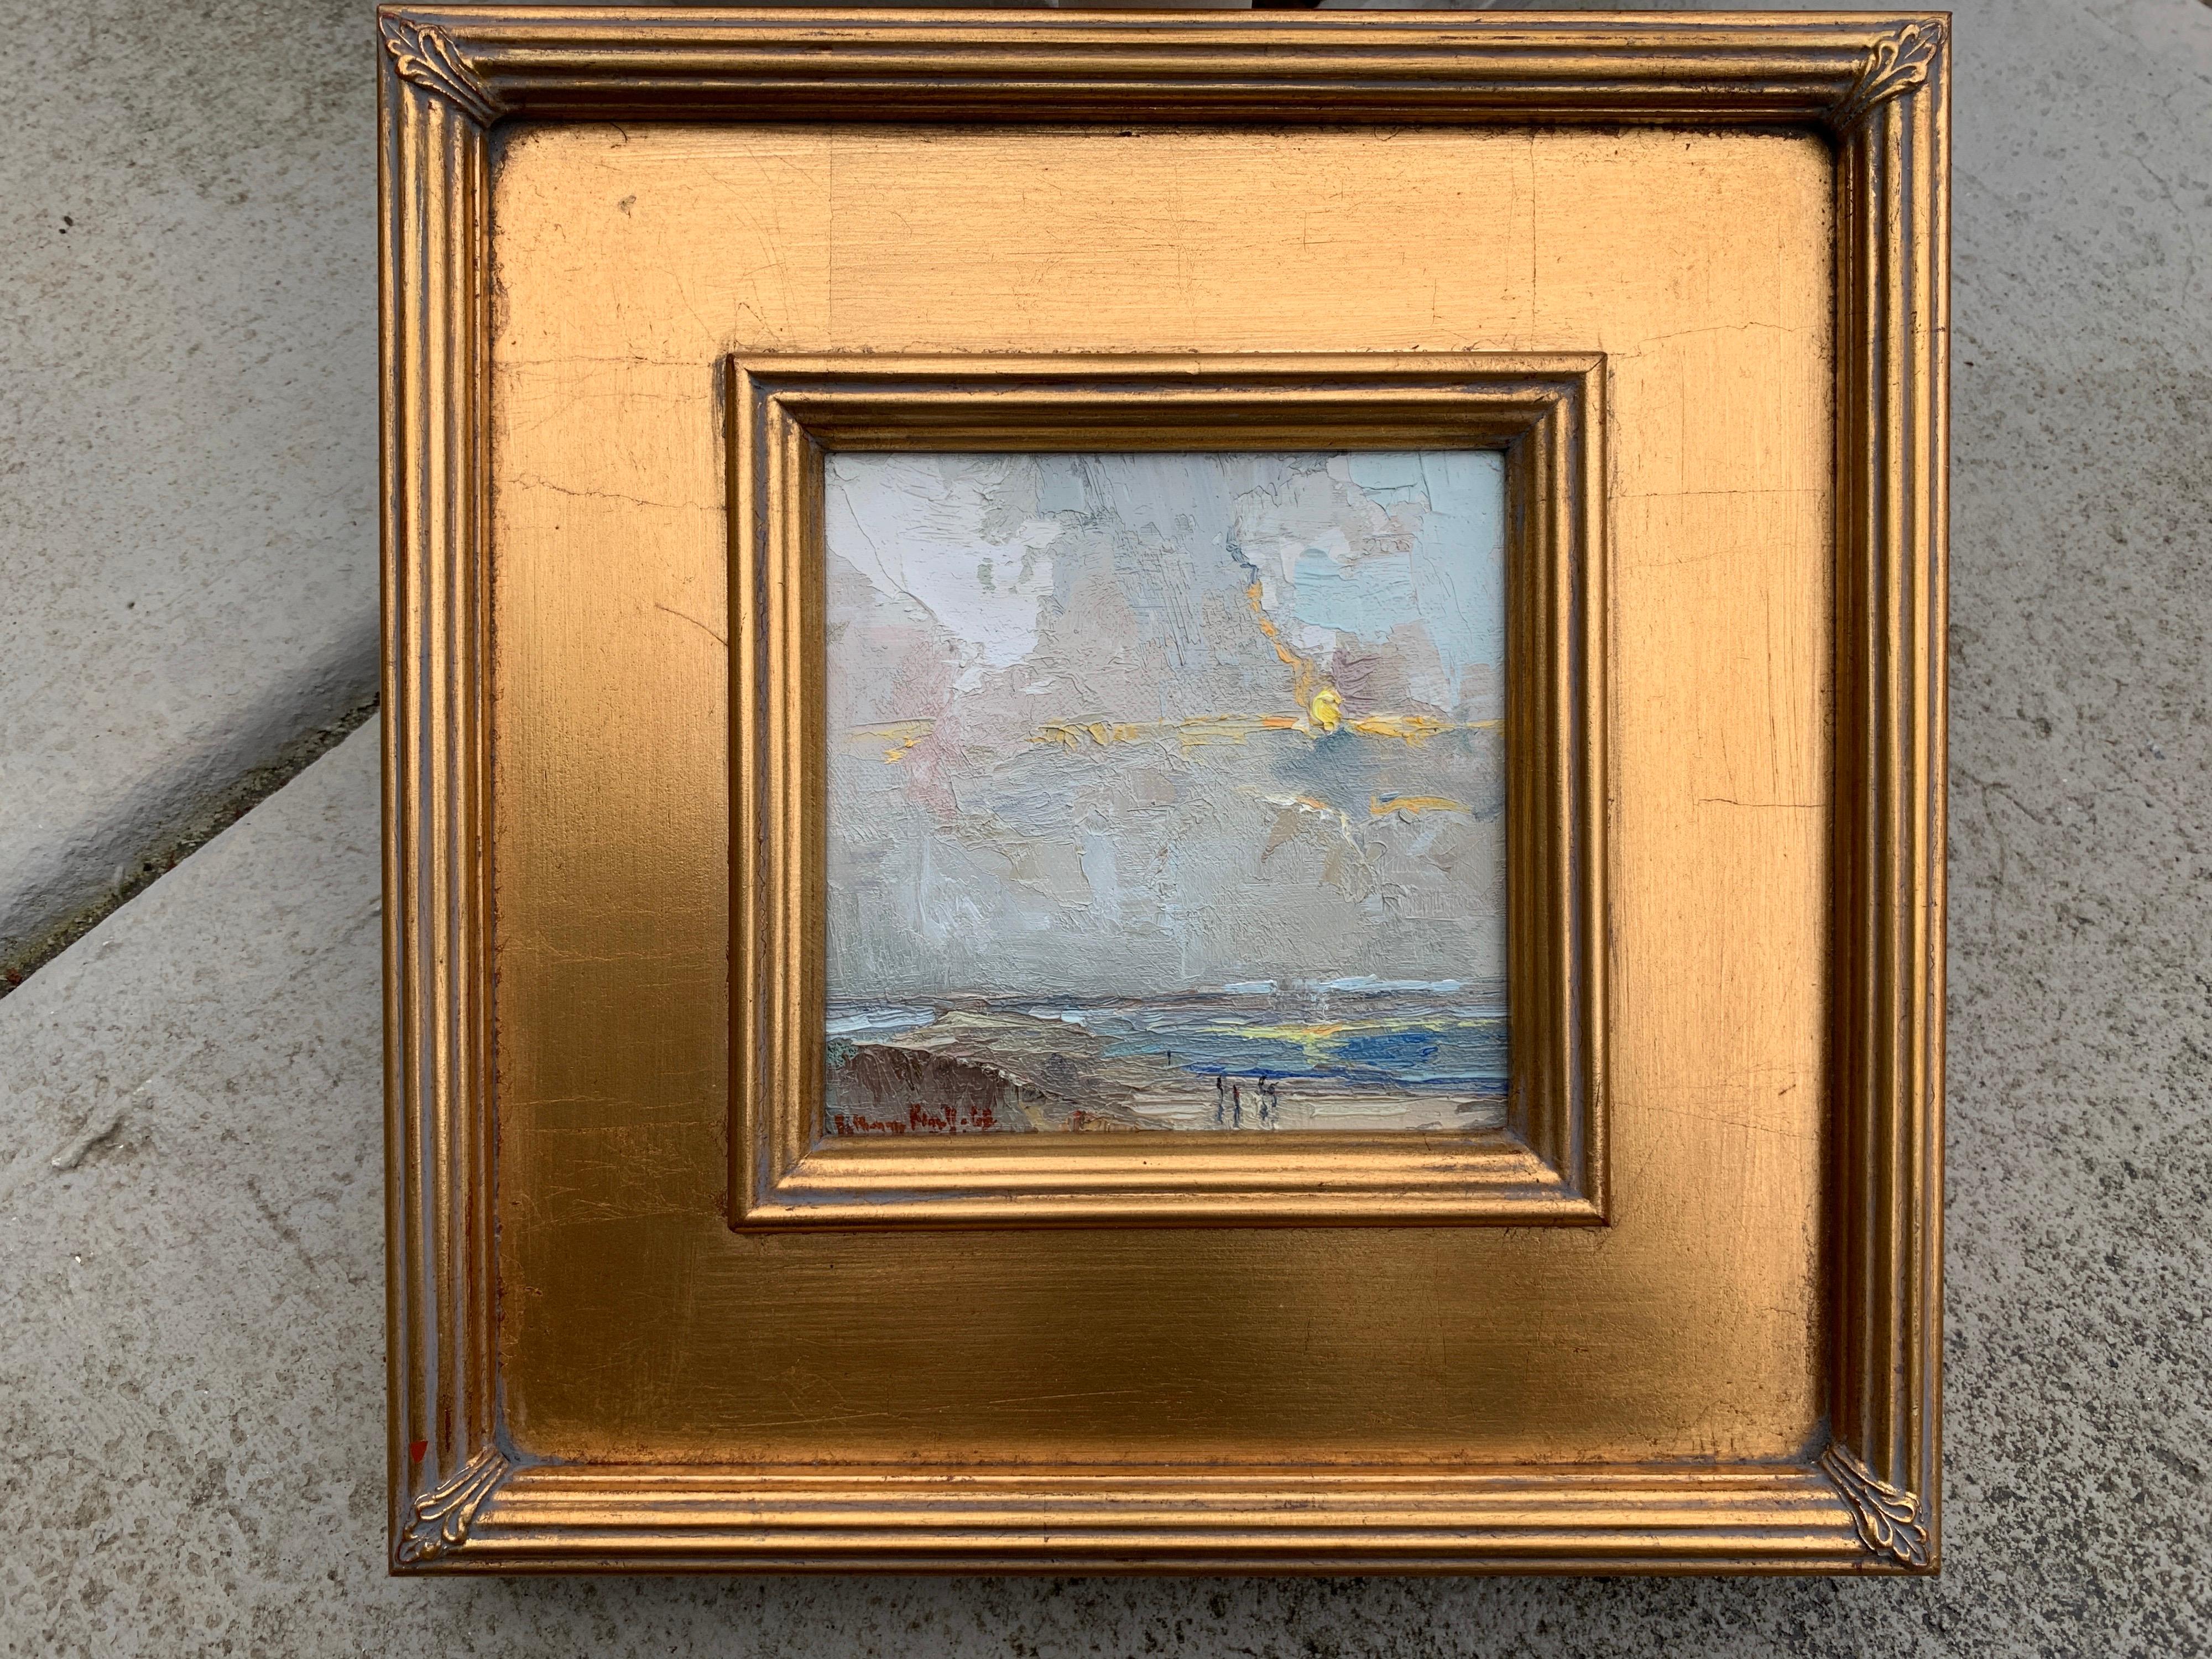 'And the Sky, Above, Below and Around us Lie?' is a small Impressionist oil on board beach painting created by American artist Bethanne Cople in 2019. Featuring a palette made of blue, green, brown and yellow tones, the painting takes its